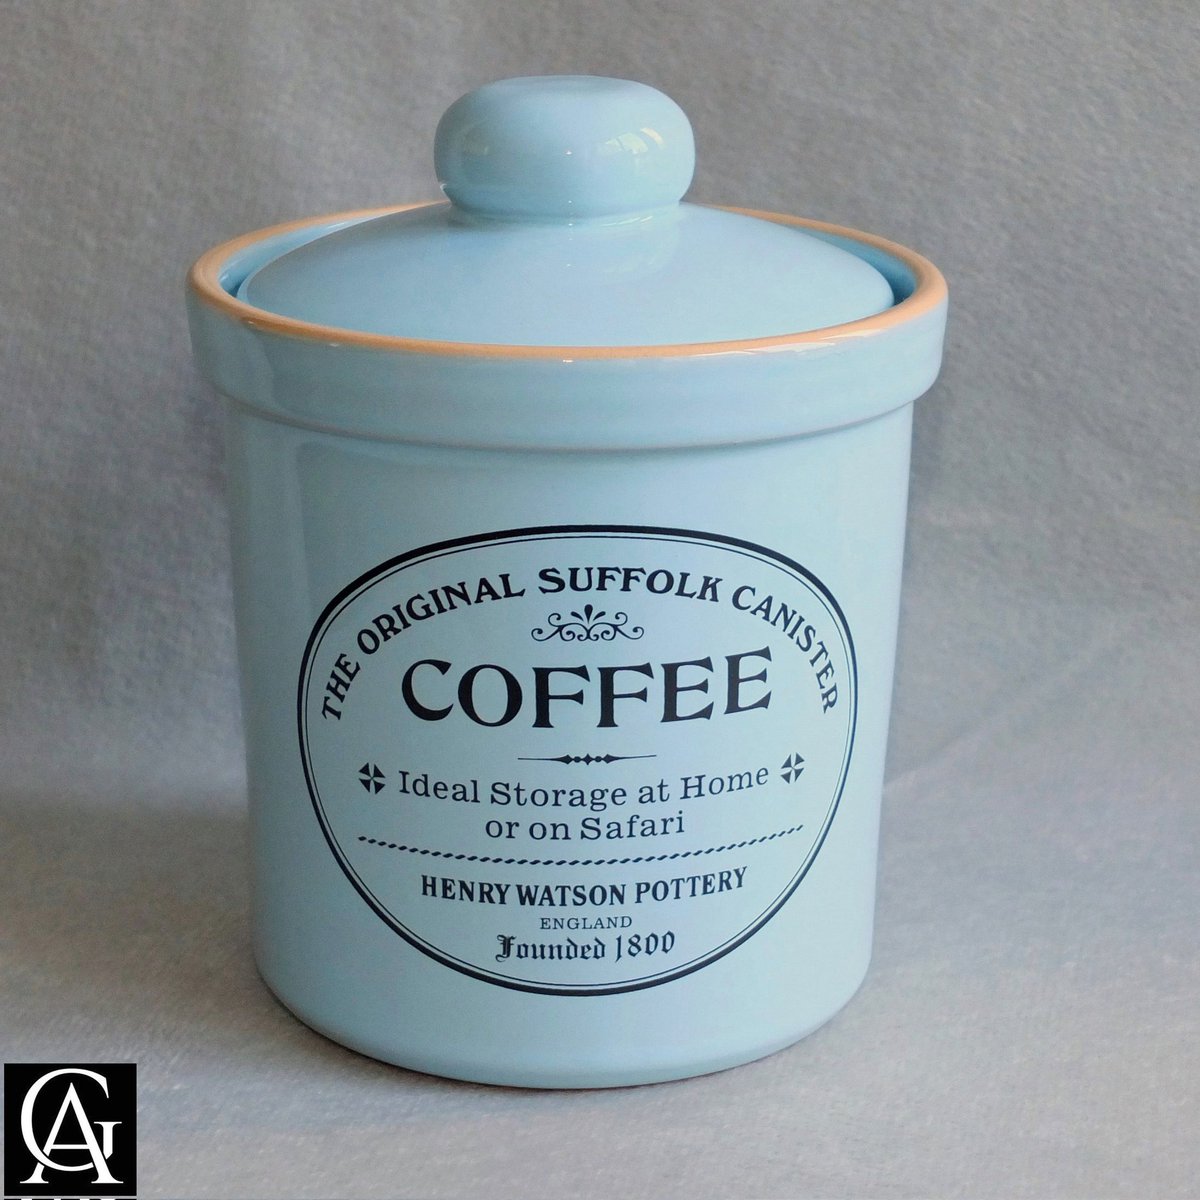 New Listing to my #etsyshop a Rare #Vintage Henry Watson #Pottery The Original #Suffolk Duck Egg Blue #Coffee Storage Jar #Terracotta Canister c.1980s

galleryantiques.etsy.com/listing/165857…

#etsy #etsyseller #eshopsuk #shopsmall #Vintagekitchenware #vintagekitchenalia